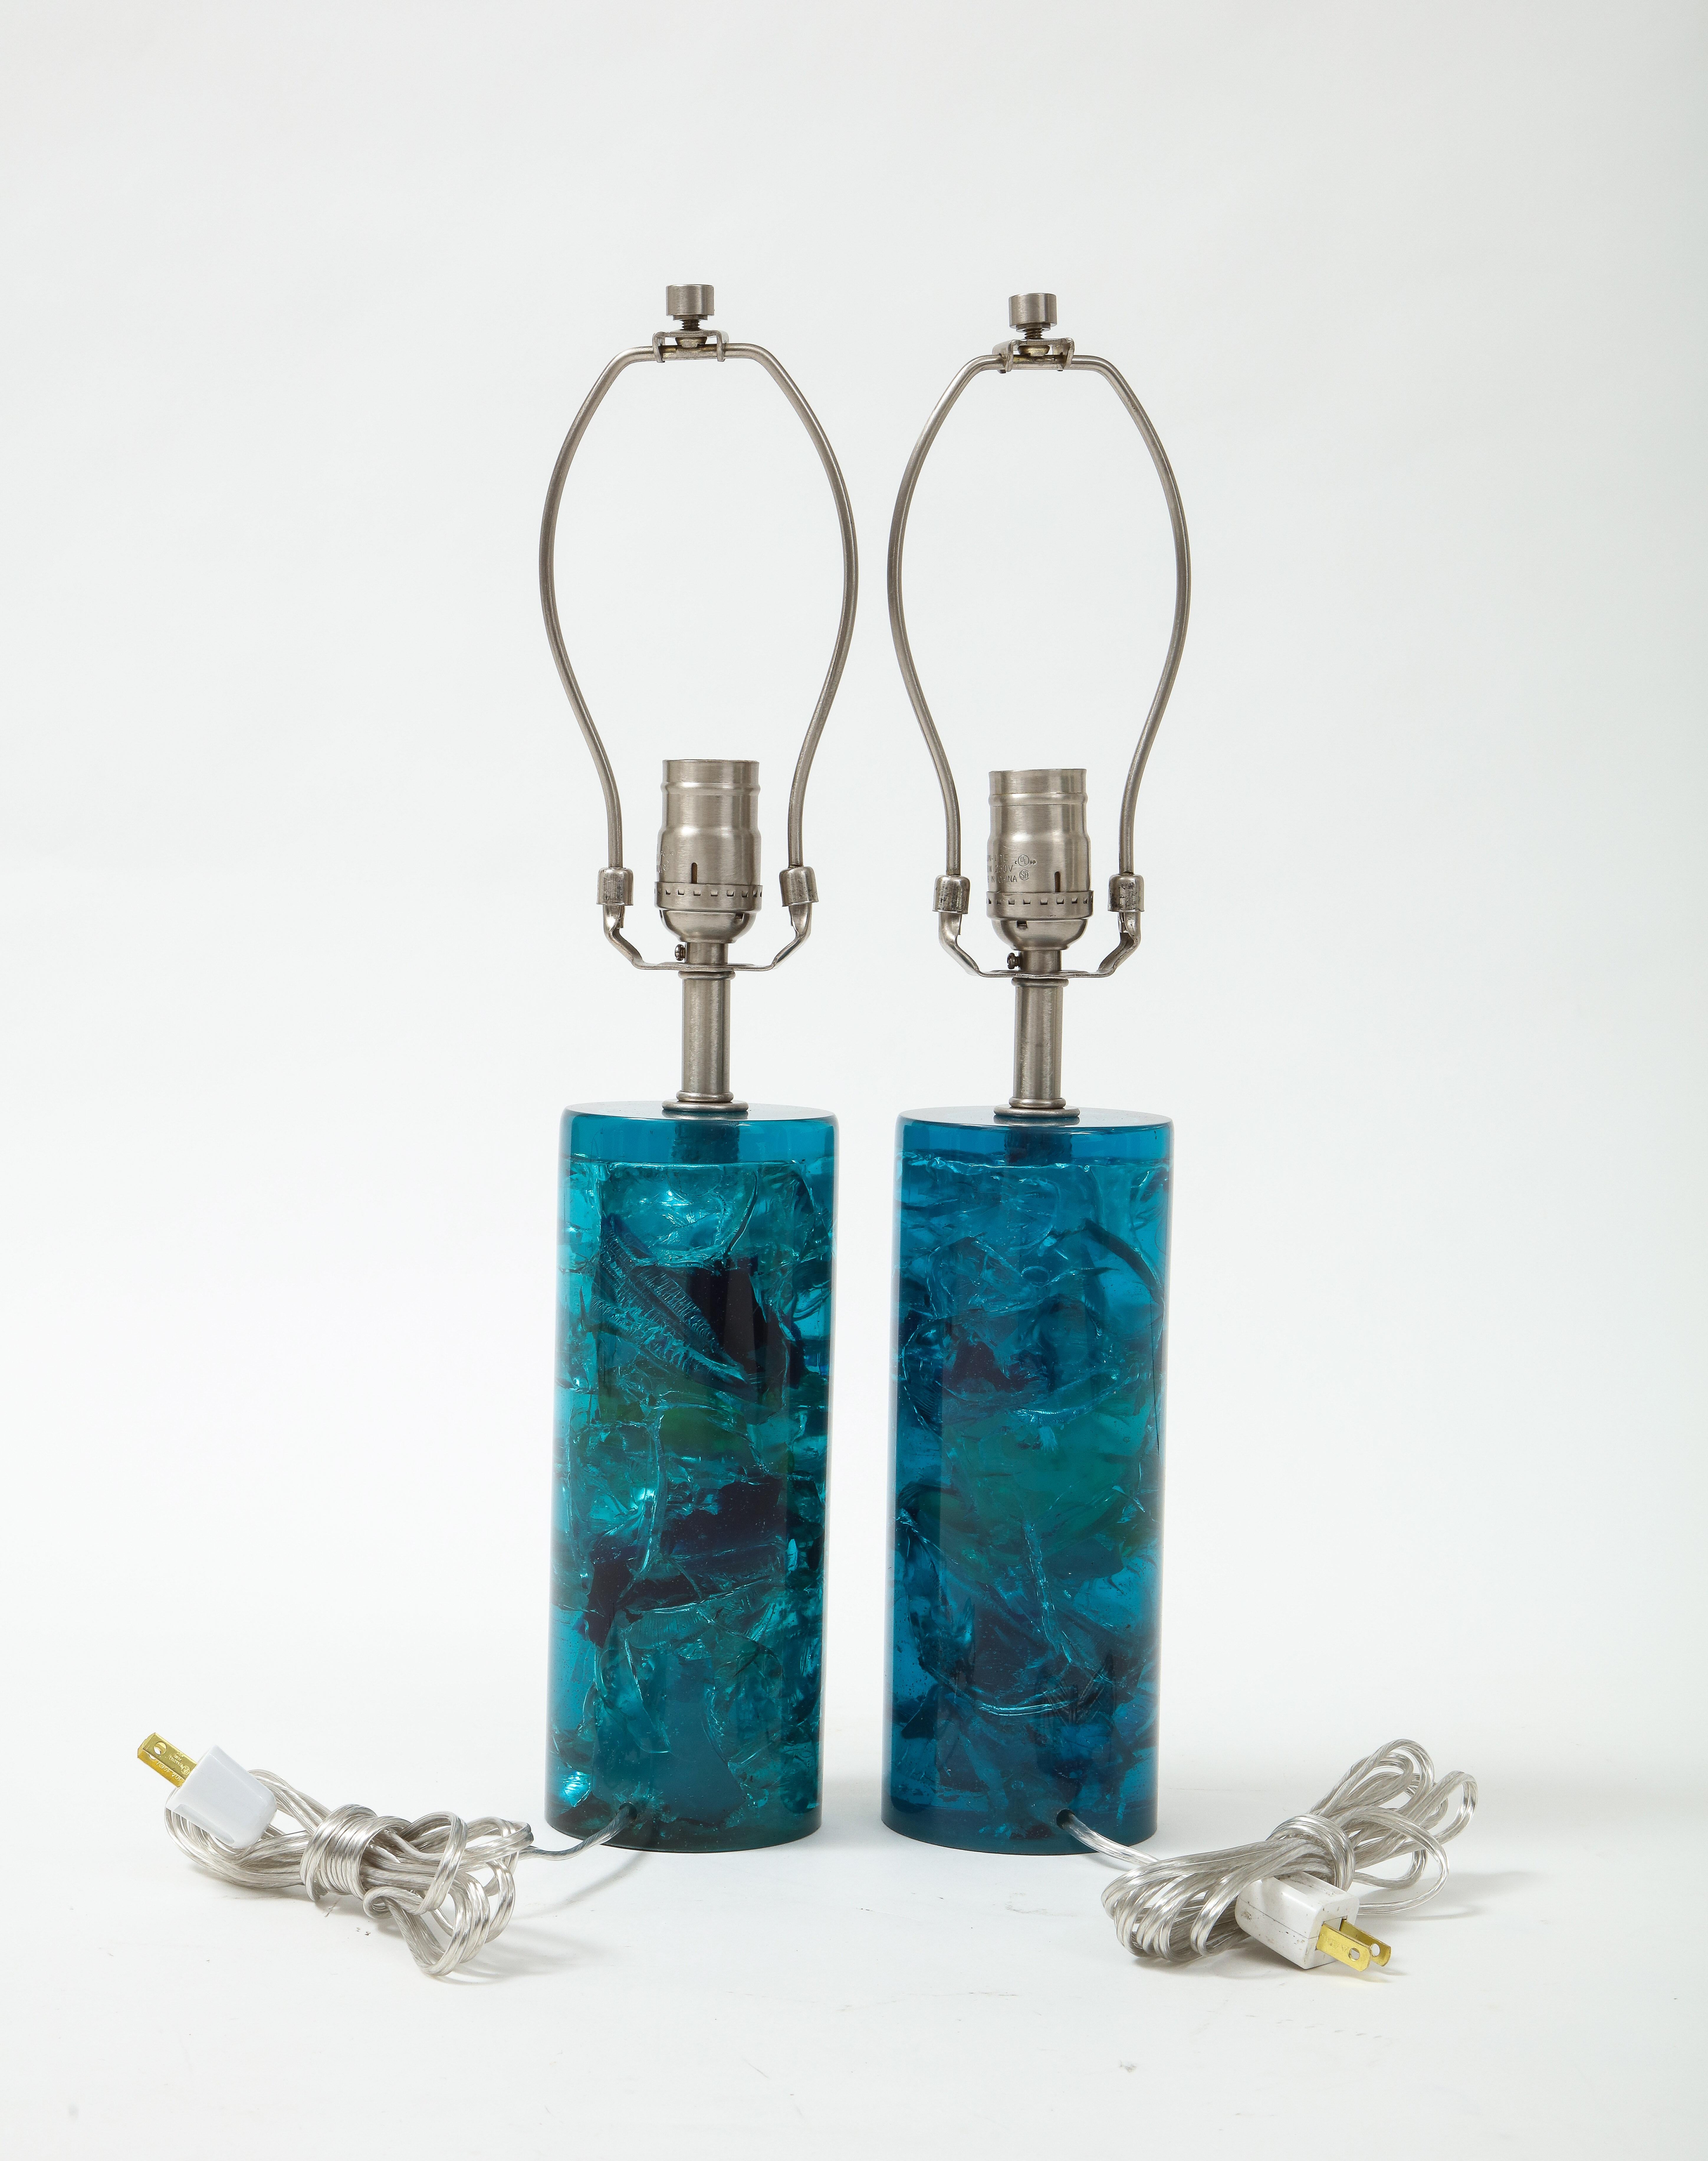 Pair of French mid century fractal resin cylinder lamps in an eye catching Turquoise blue. Rewired for use in the USA. 100W max. Height listed is an overall height including harp.